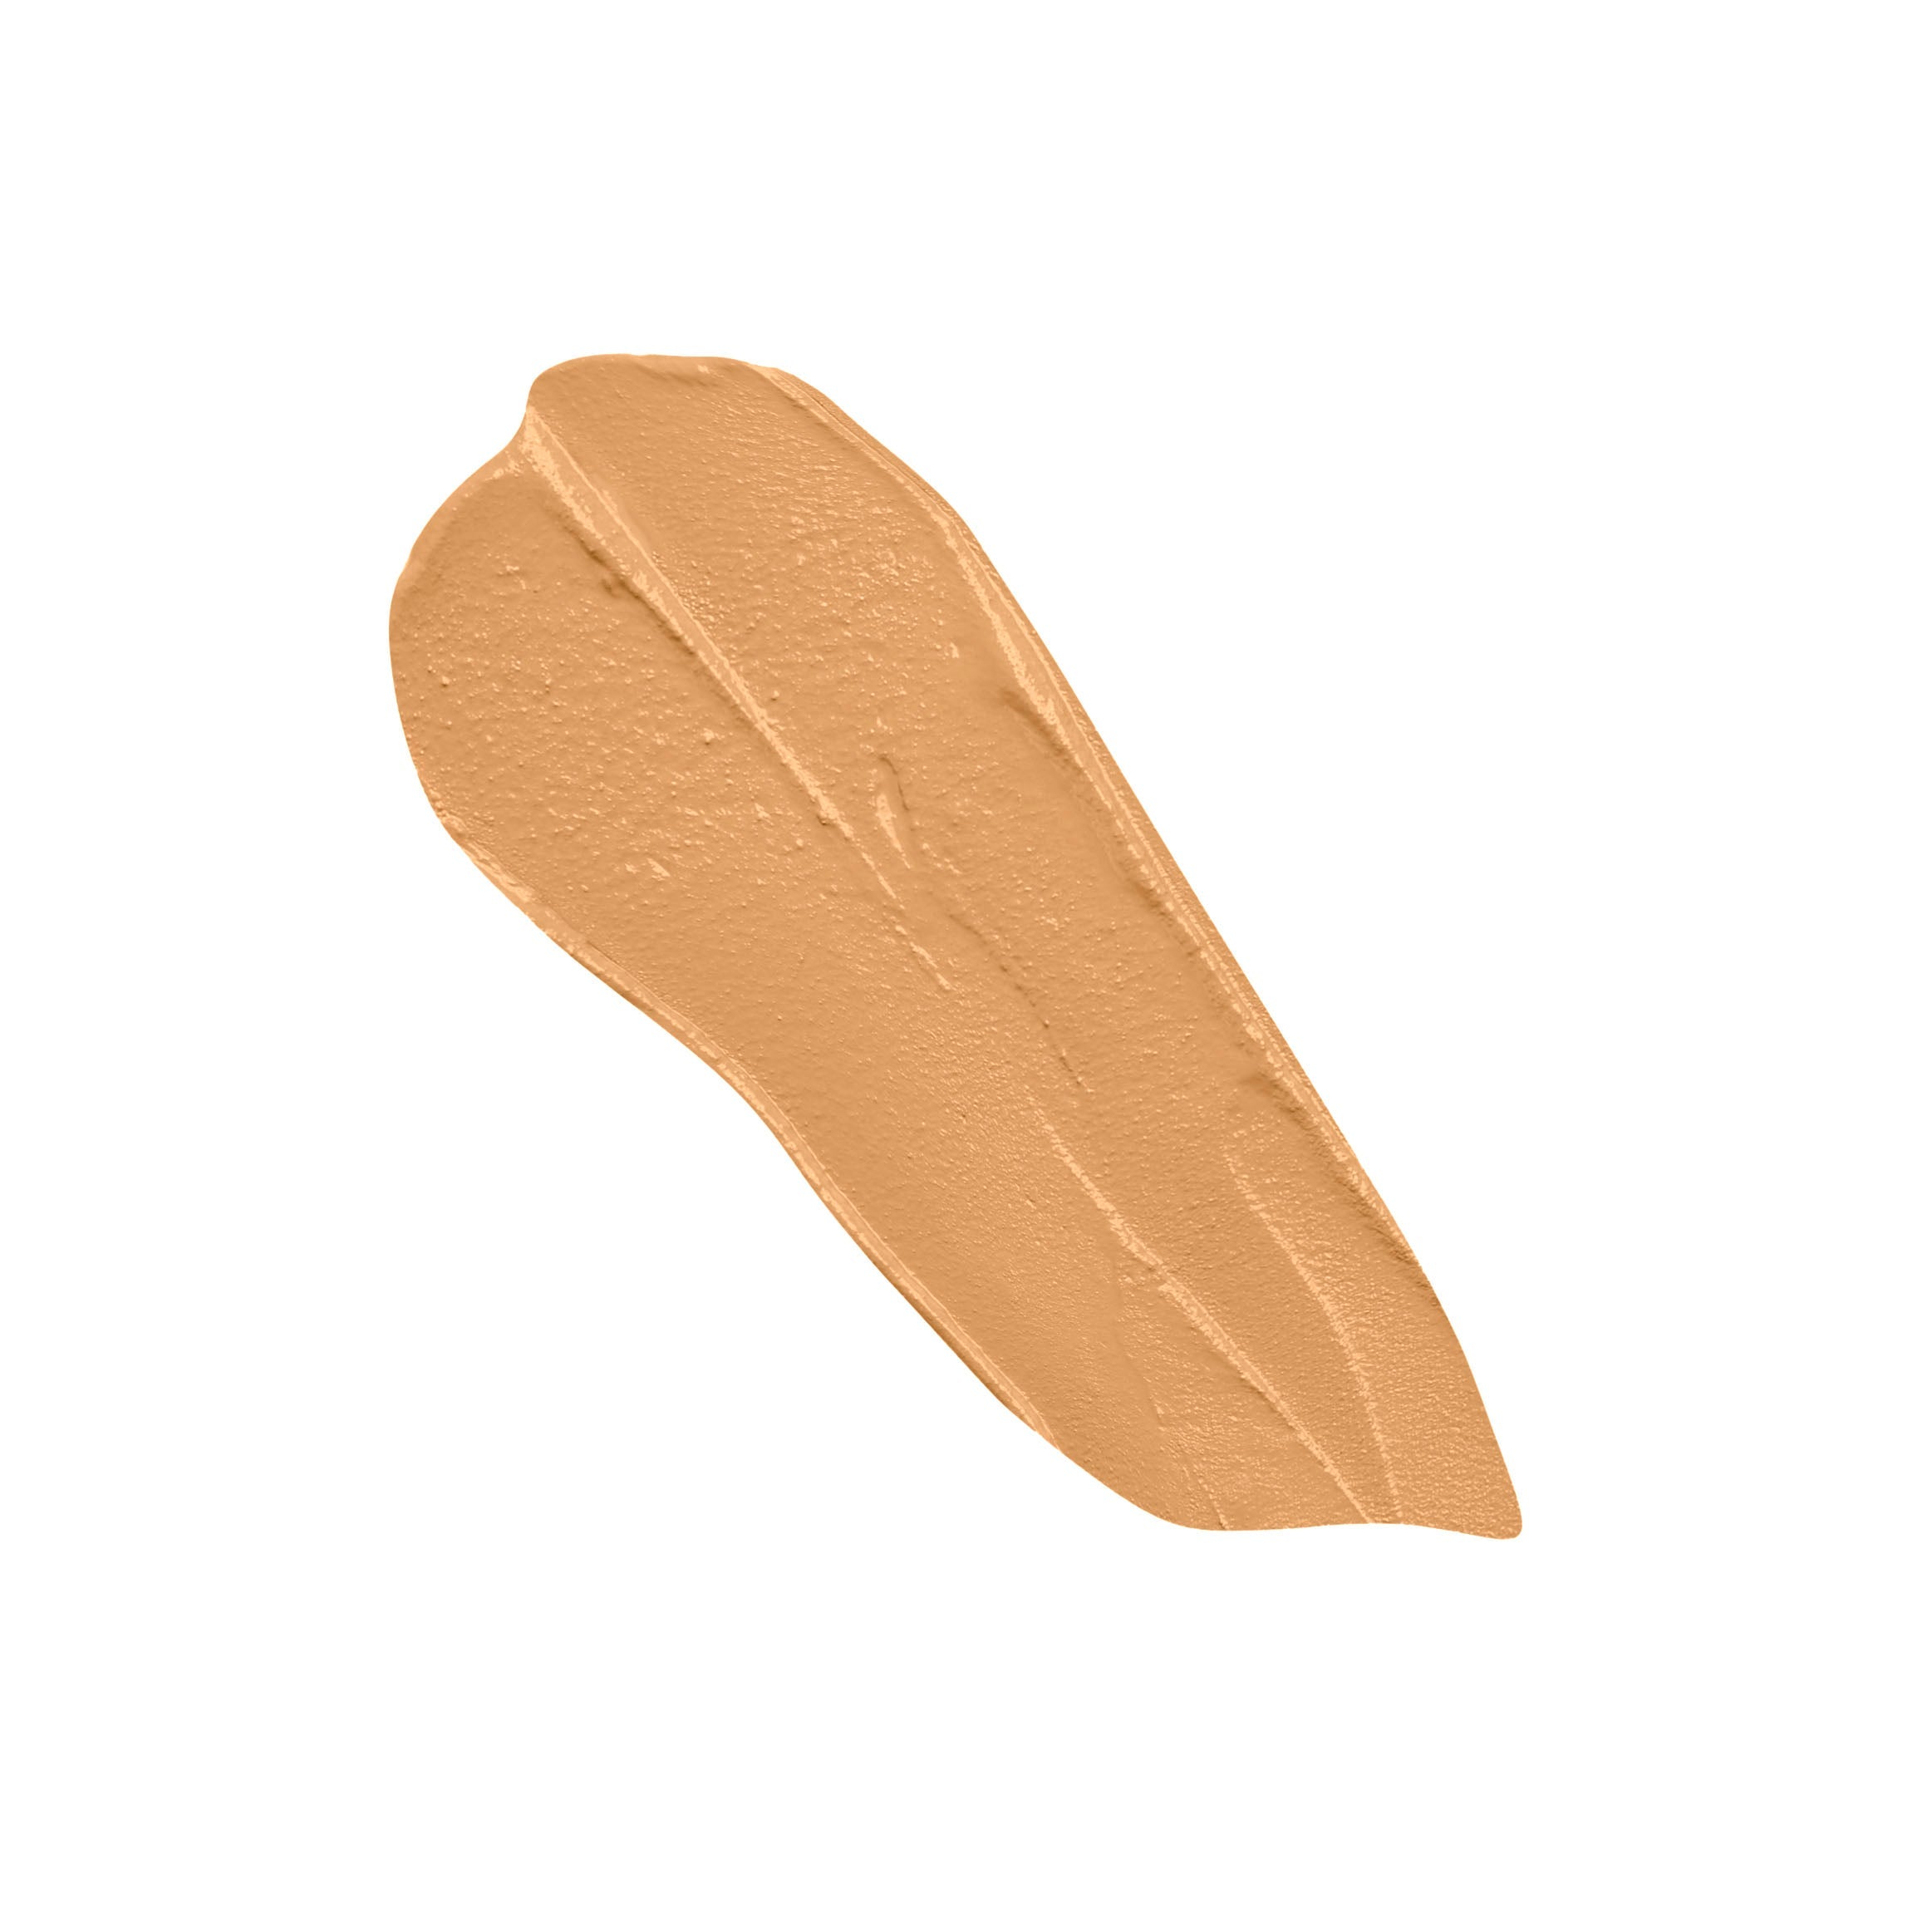 Rele-Wand™ 3-N-1 Foundation | Inspire